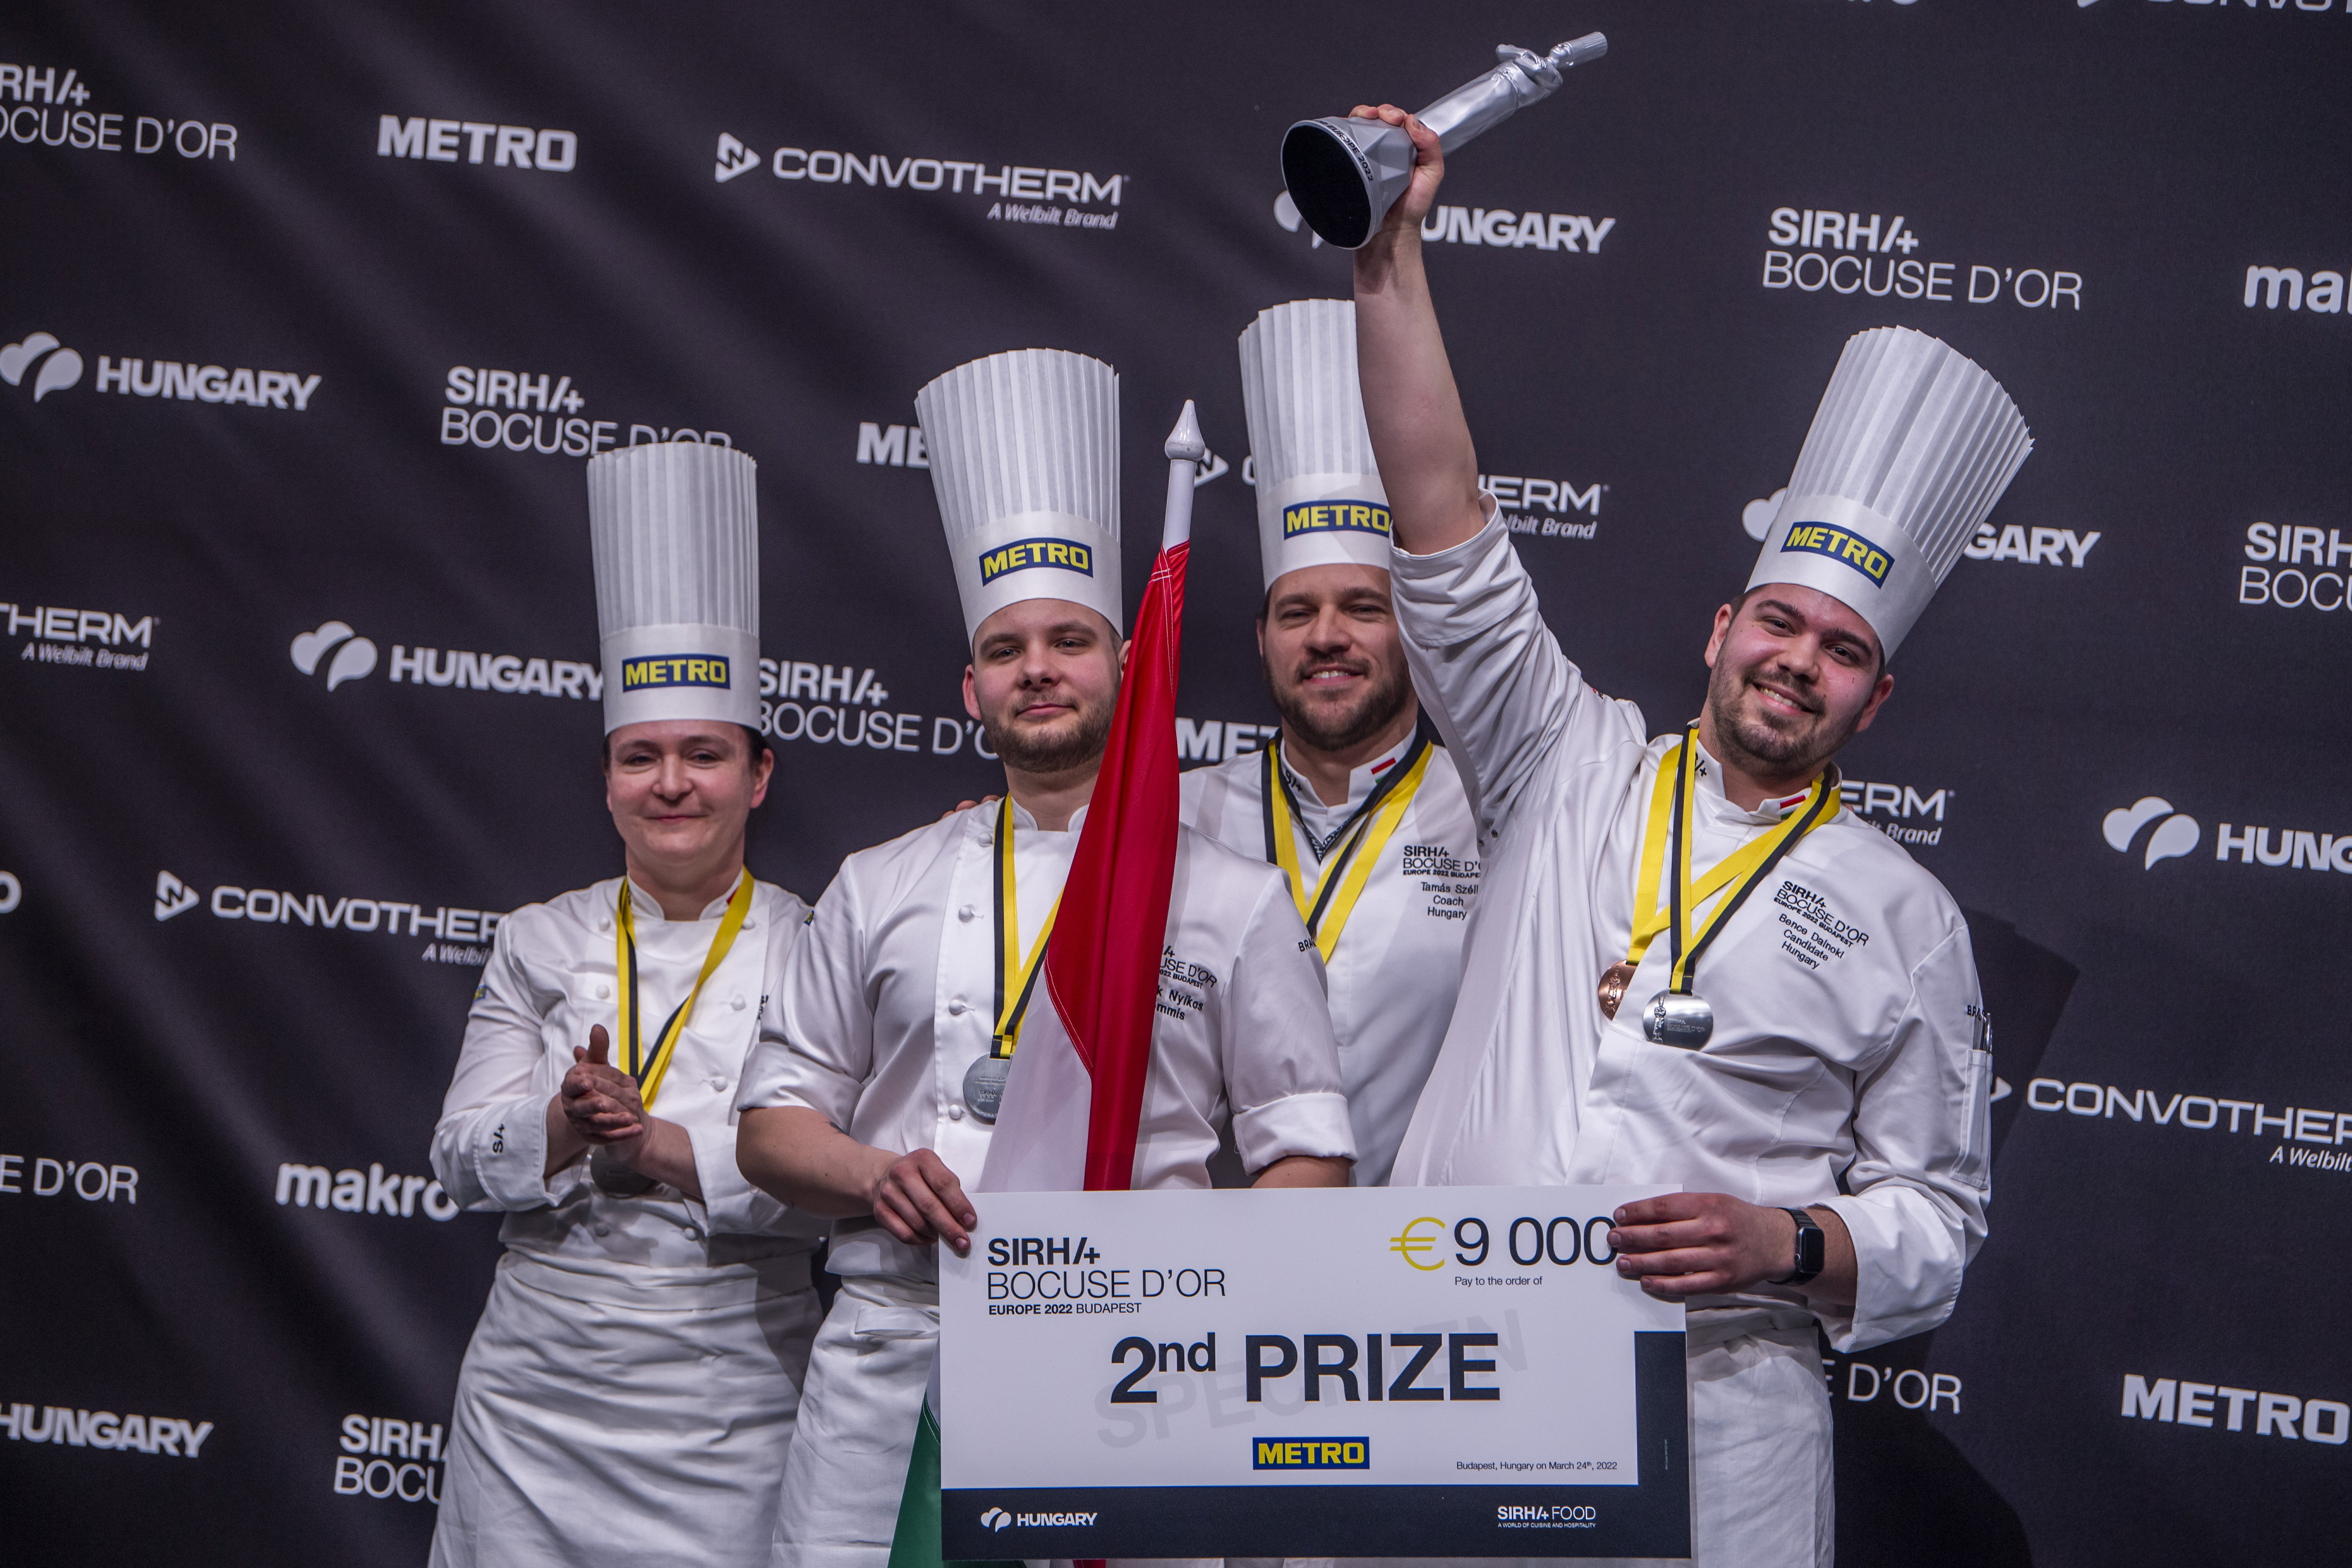 Hungarian team runner-up at Bocuse d'Or continental qualifie...